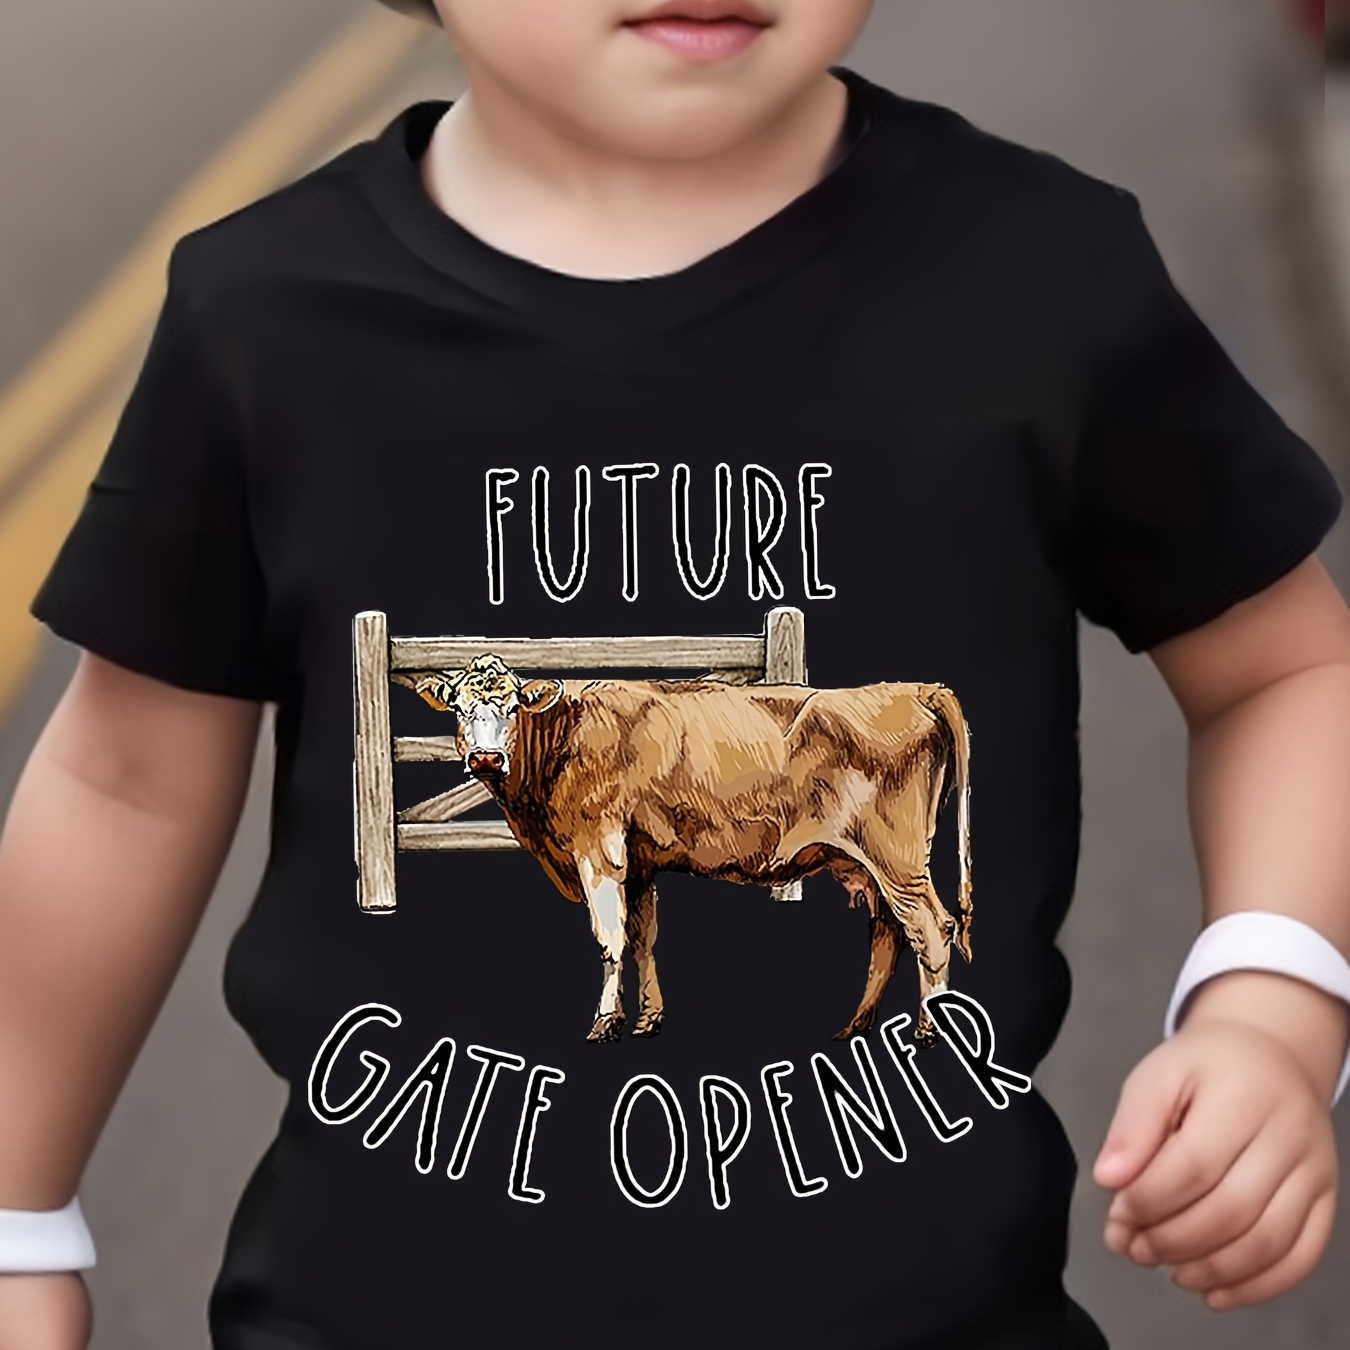 

Future&gate Opener Letter And Cow Print Boys Creative T-shirt, Casual Lightweight Comfy Short Sleeve Tee Tops, Kids Clothings For Summer